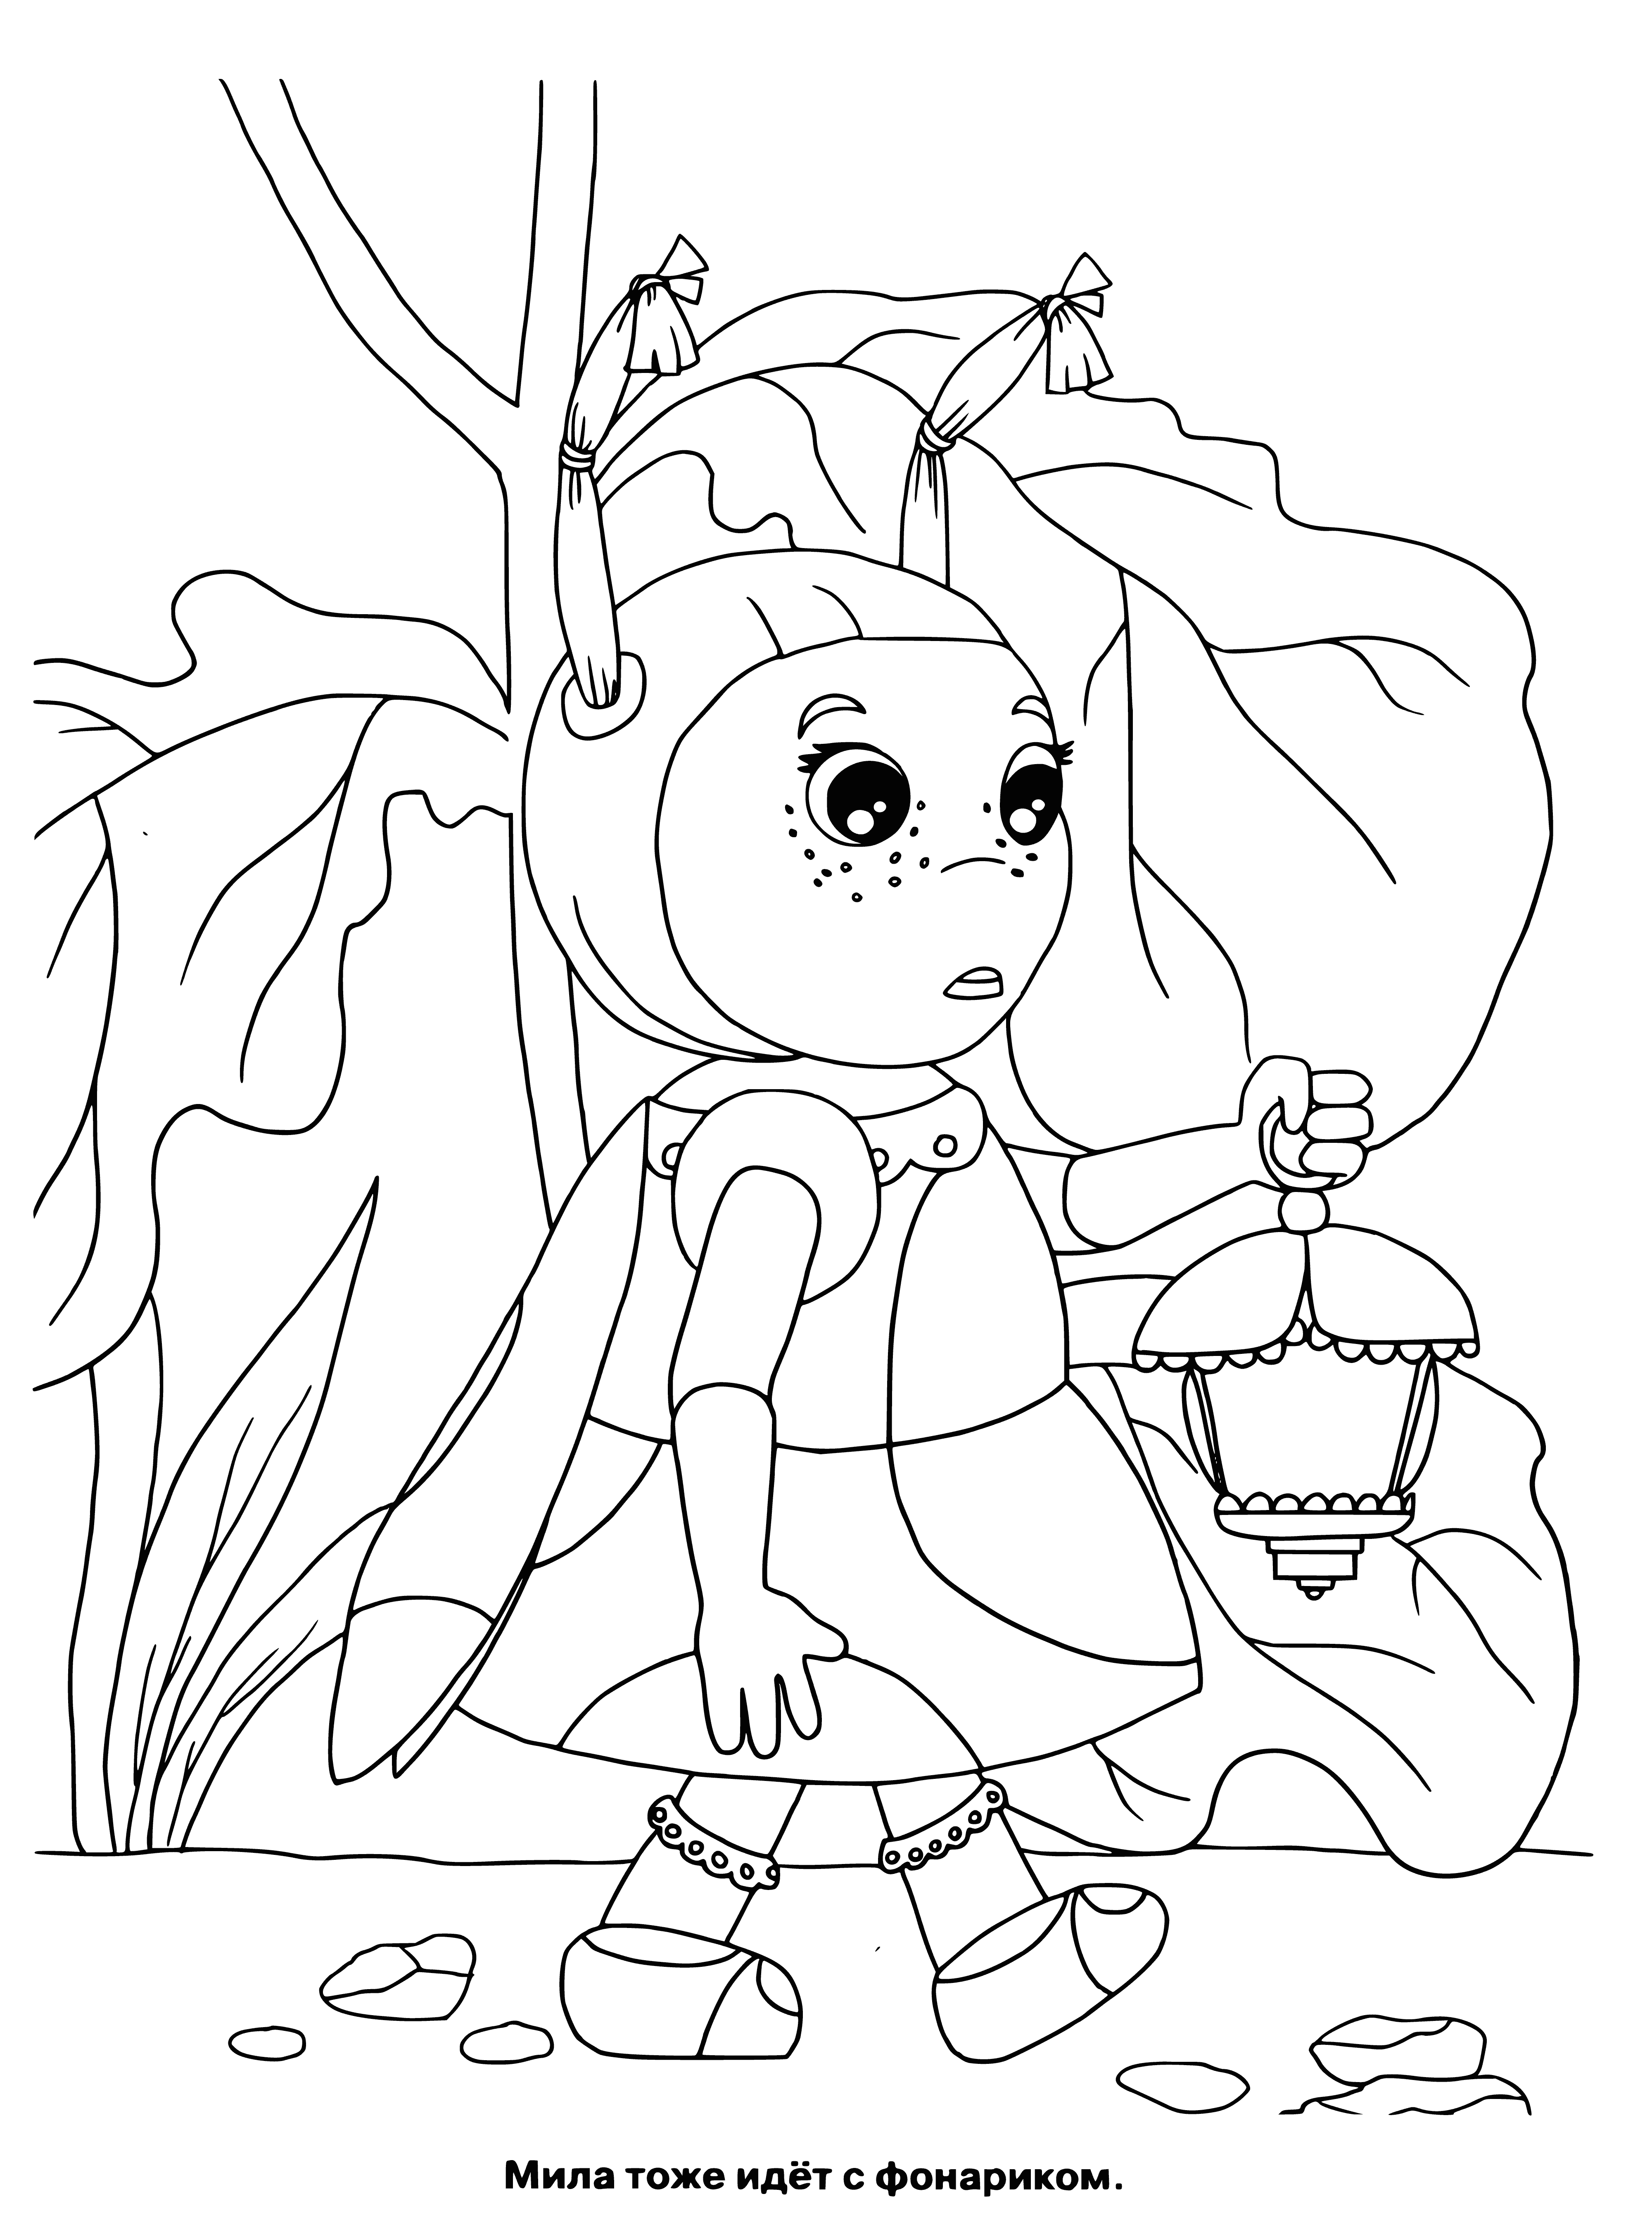 coloring page: 5 creatures in coloring pg - big heads, small bods, lg arms/legs, eyes on top, mouths/noses/ears, 4 fingers/toes. On a green grass bg w/blue sky & white clouds.